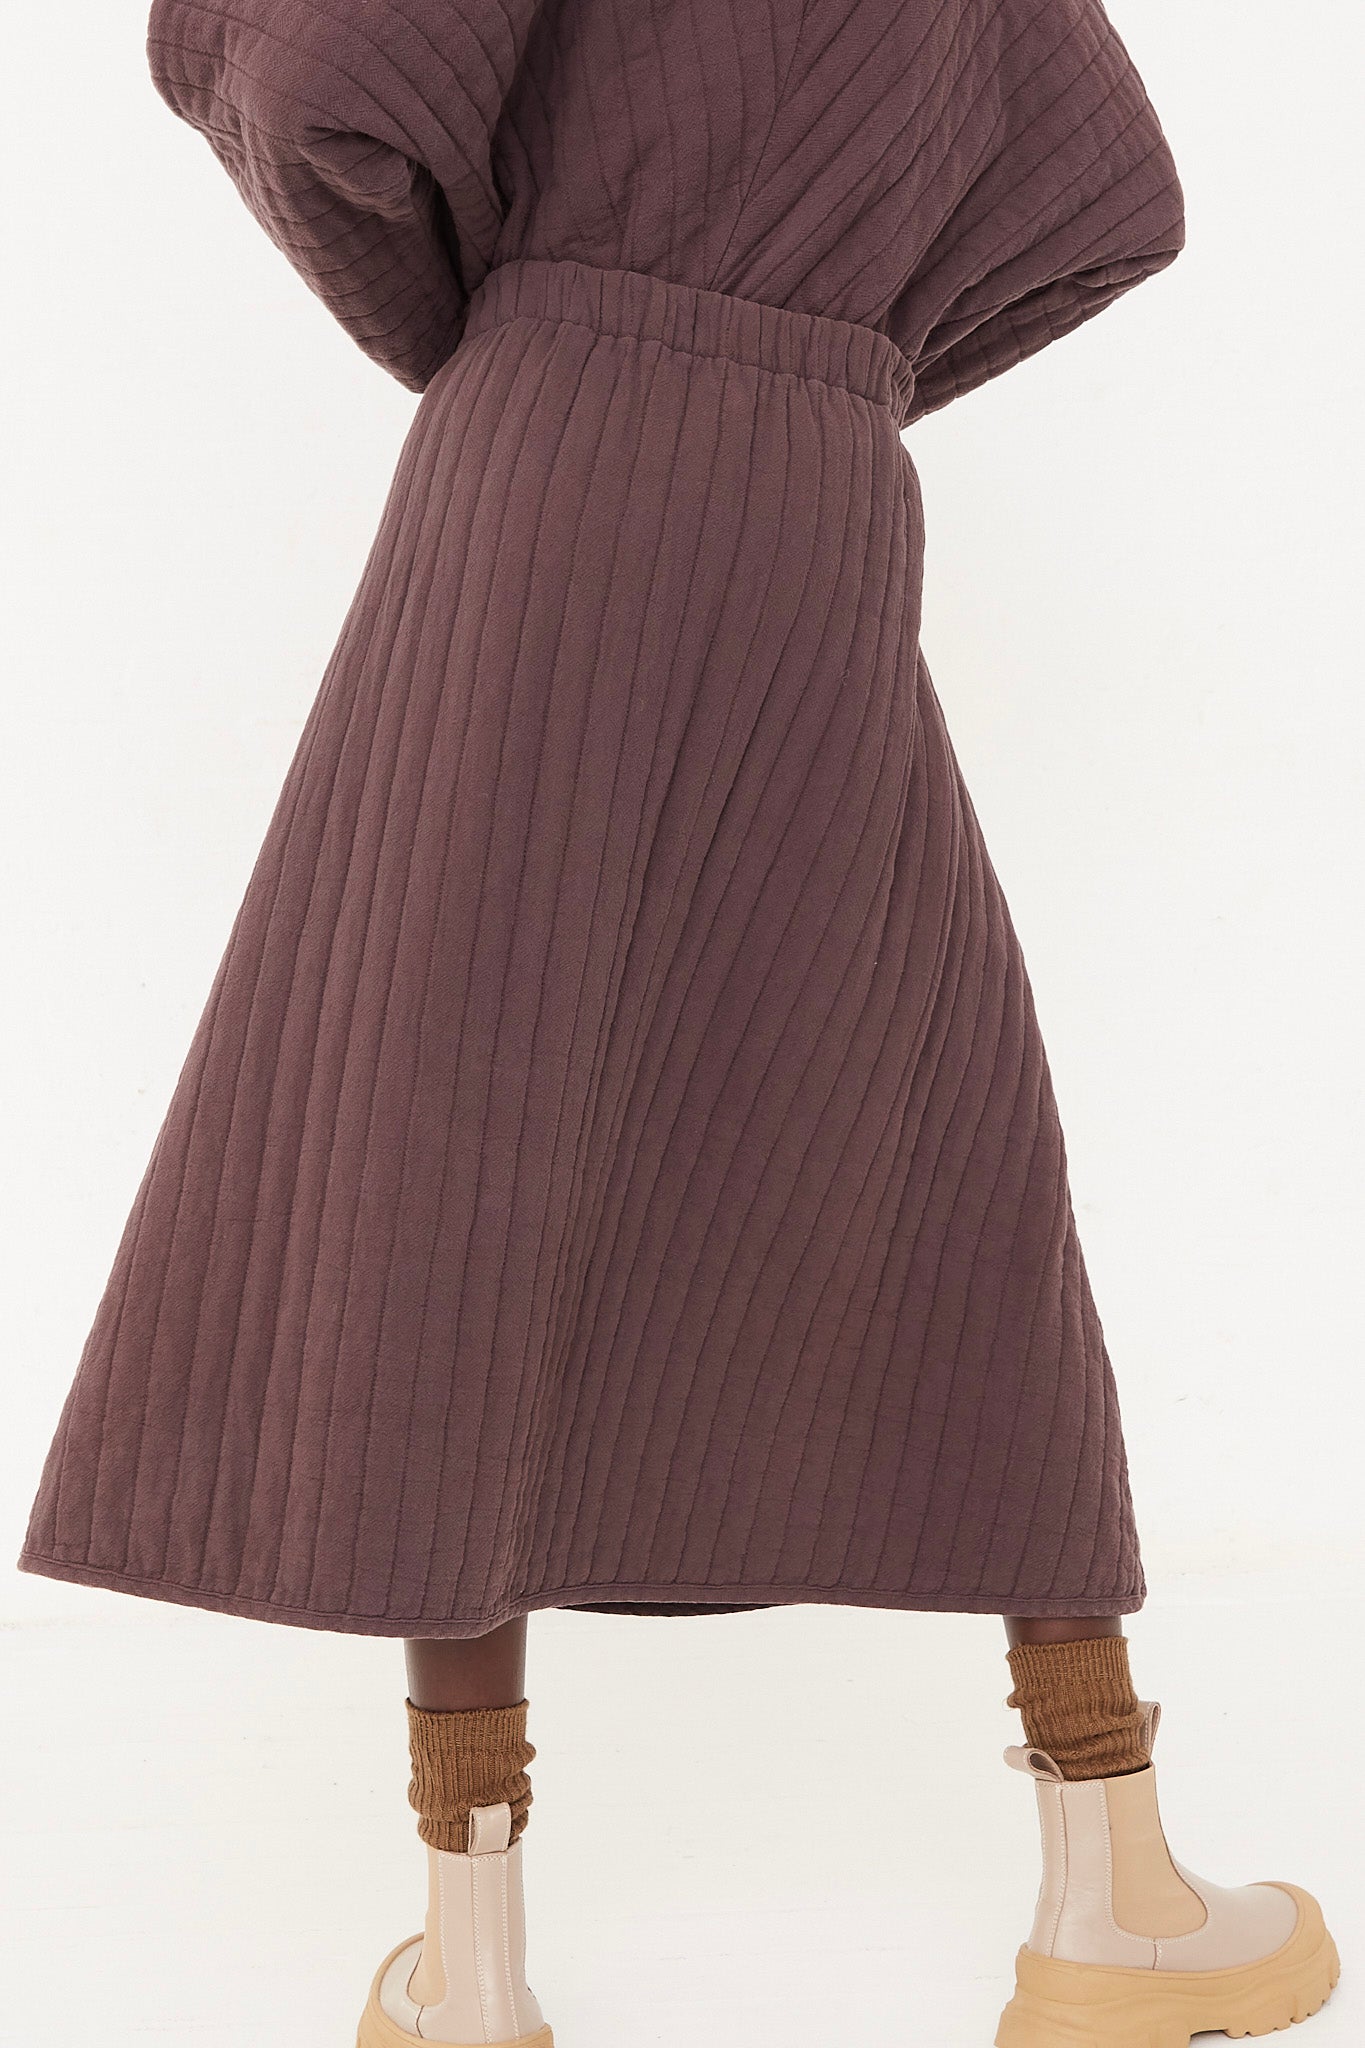 The back of a woman wearing a Black Crane Quilted Skirt in Plum with an elasticated waist.